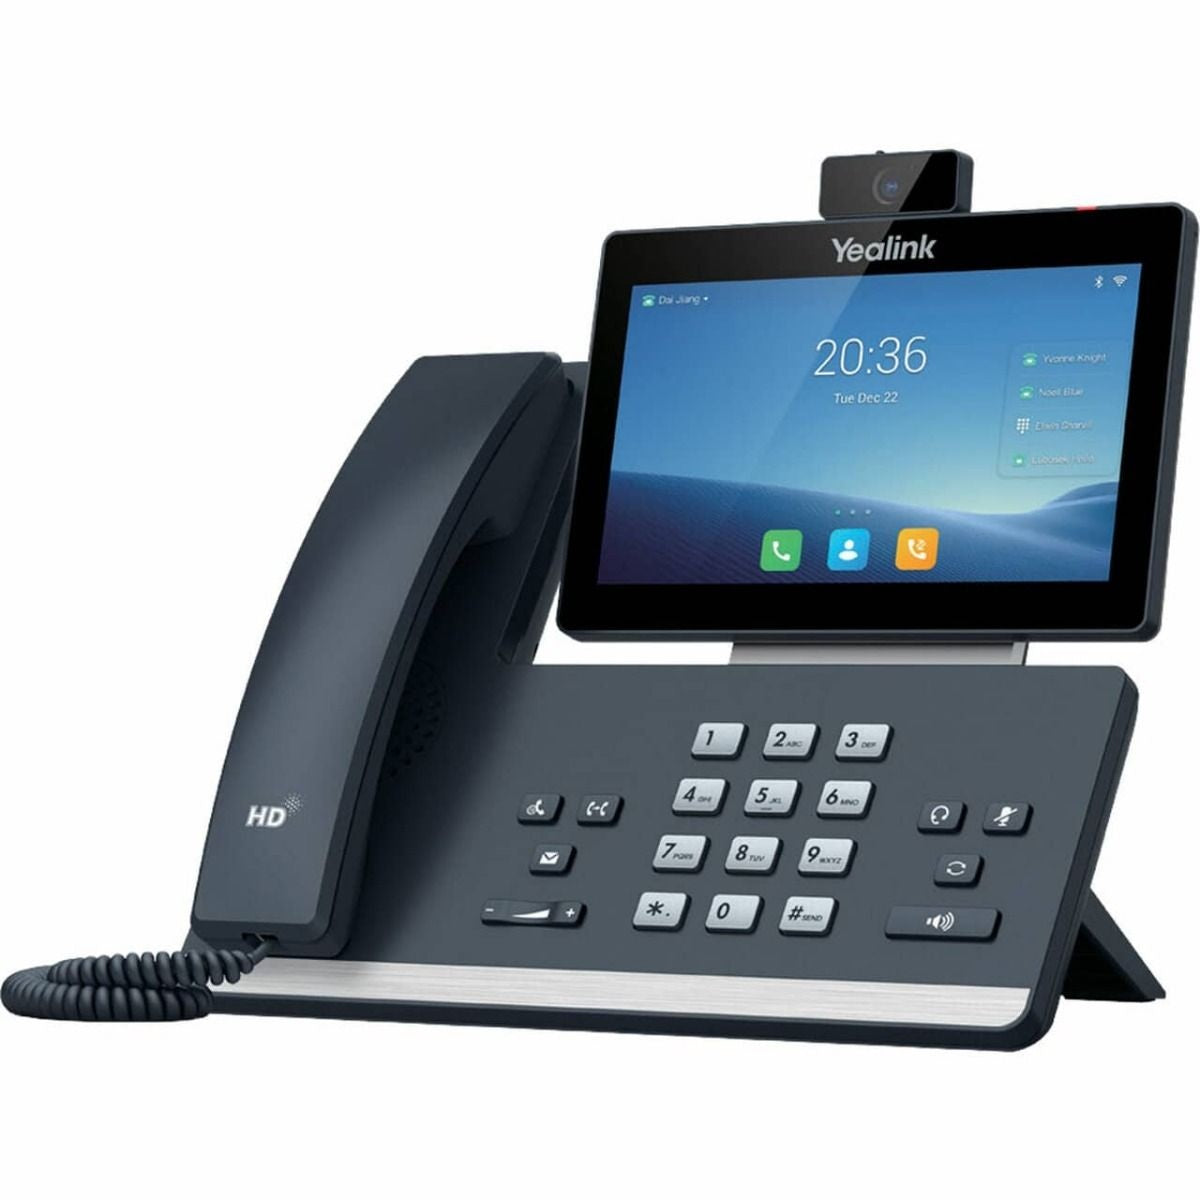 Yealink-T58W-with-Camera-Gigabit-IP-Phone-Right-Side